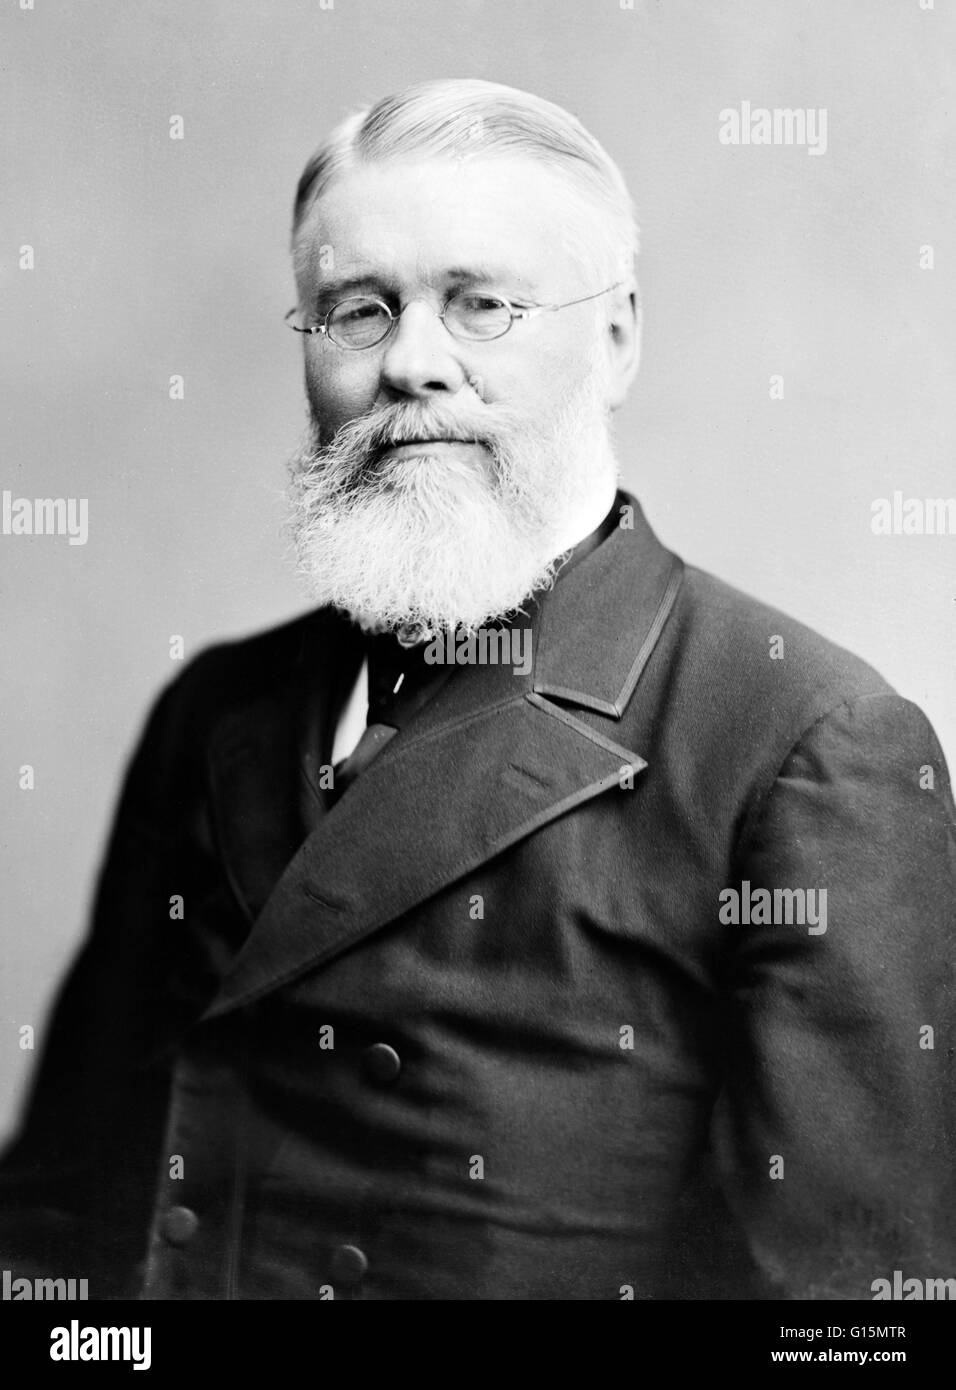 Richard Jordan Gatling (September 12, 1818 - February 26, 1903) was an American inventor. While being most known for inventing the Gatling Gun, Gatling invented and patented a number of other inventions. His inventions include a screw propeller and a whea Stock Photo